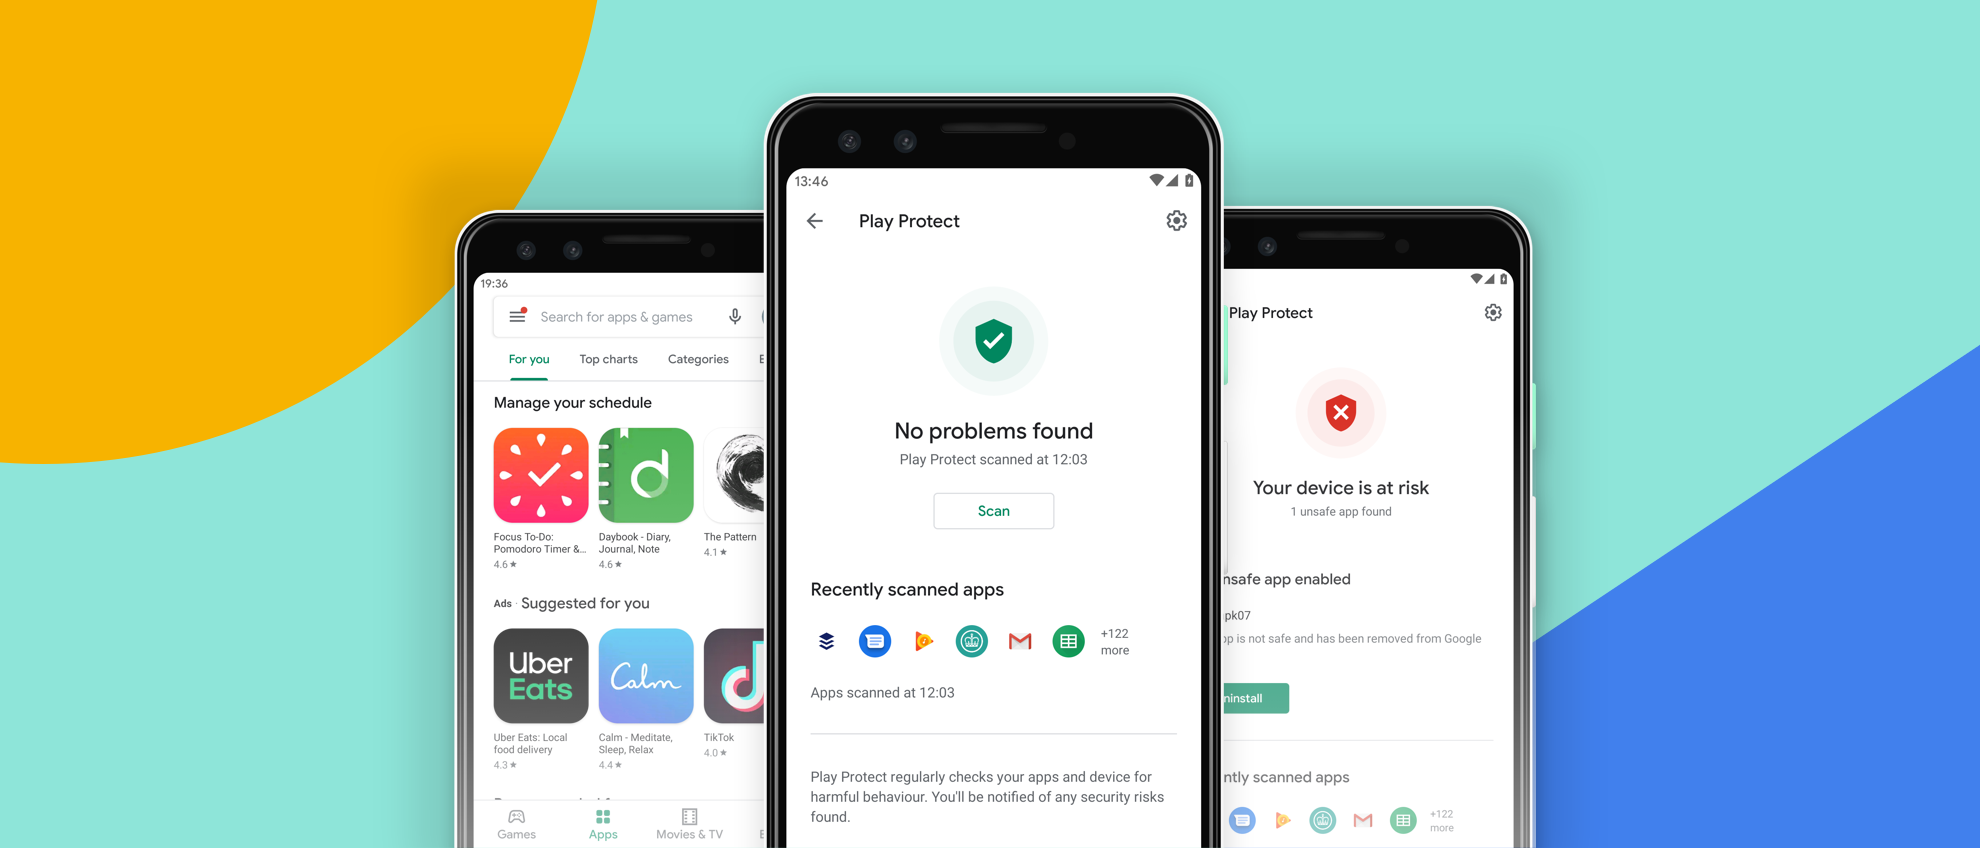 Case study: Google Play Protect